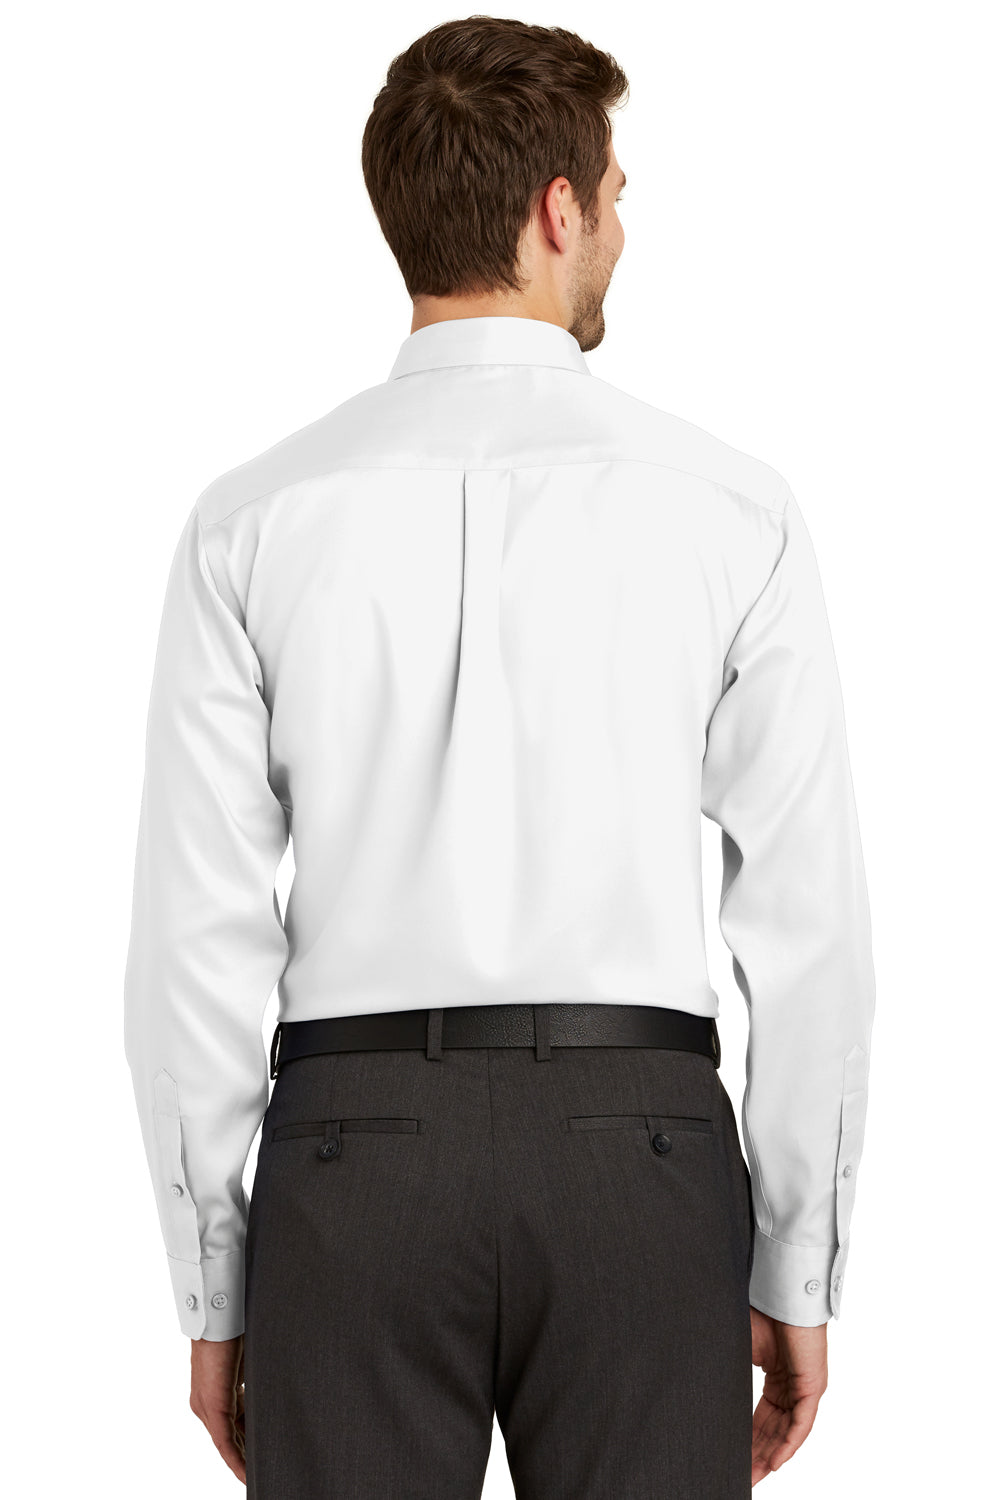 Port Authority S638 Mens Wrinkle Resistant Long Sleeve Button Down Shirt w/ Pocket White Back